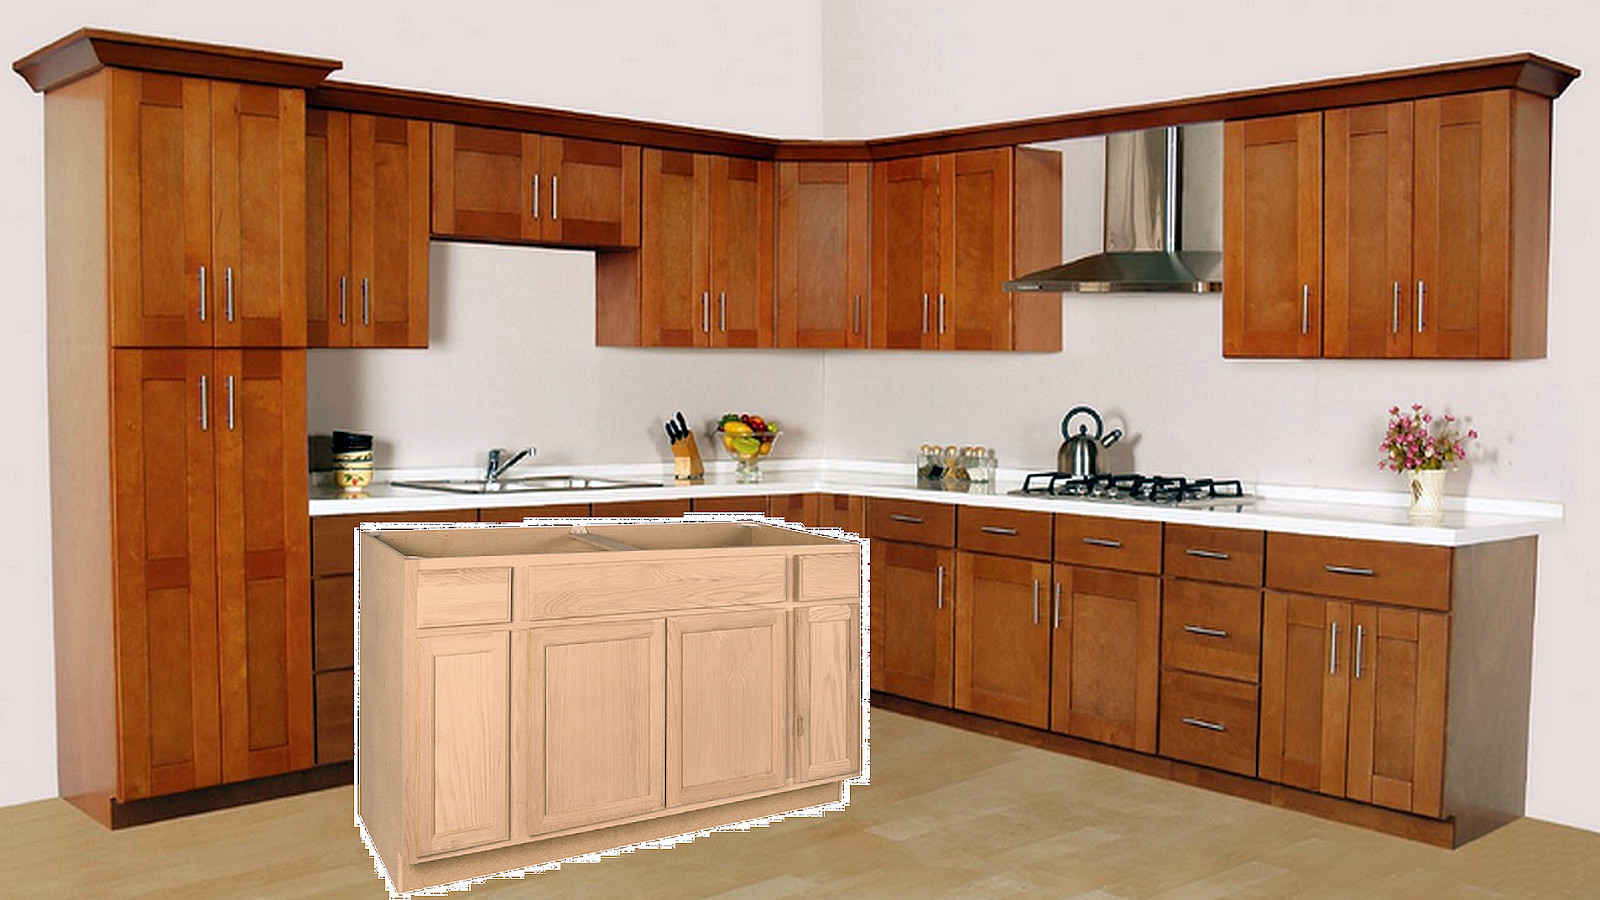 Home Depot Unfinished Kitchen Cabinets Luxury How To Finish Unfinished Kitchen Cabinets Of Home Depot Unfinished Kitchen Cabinets 